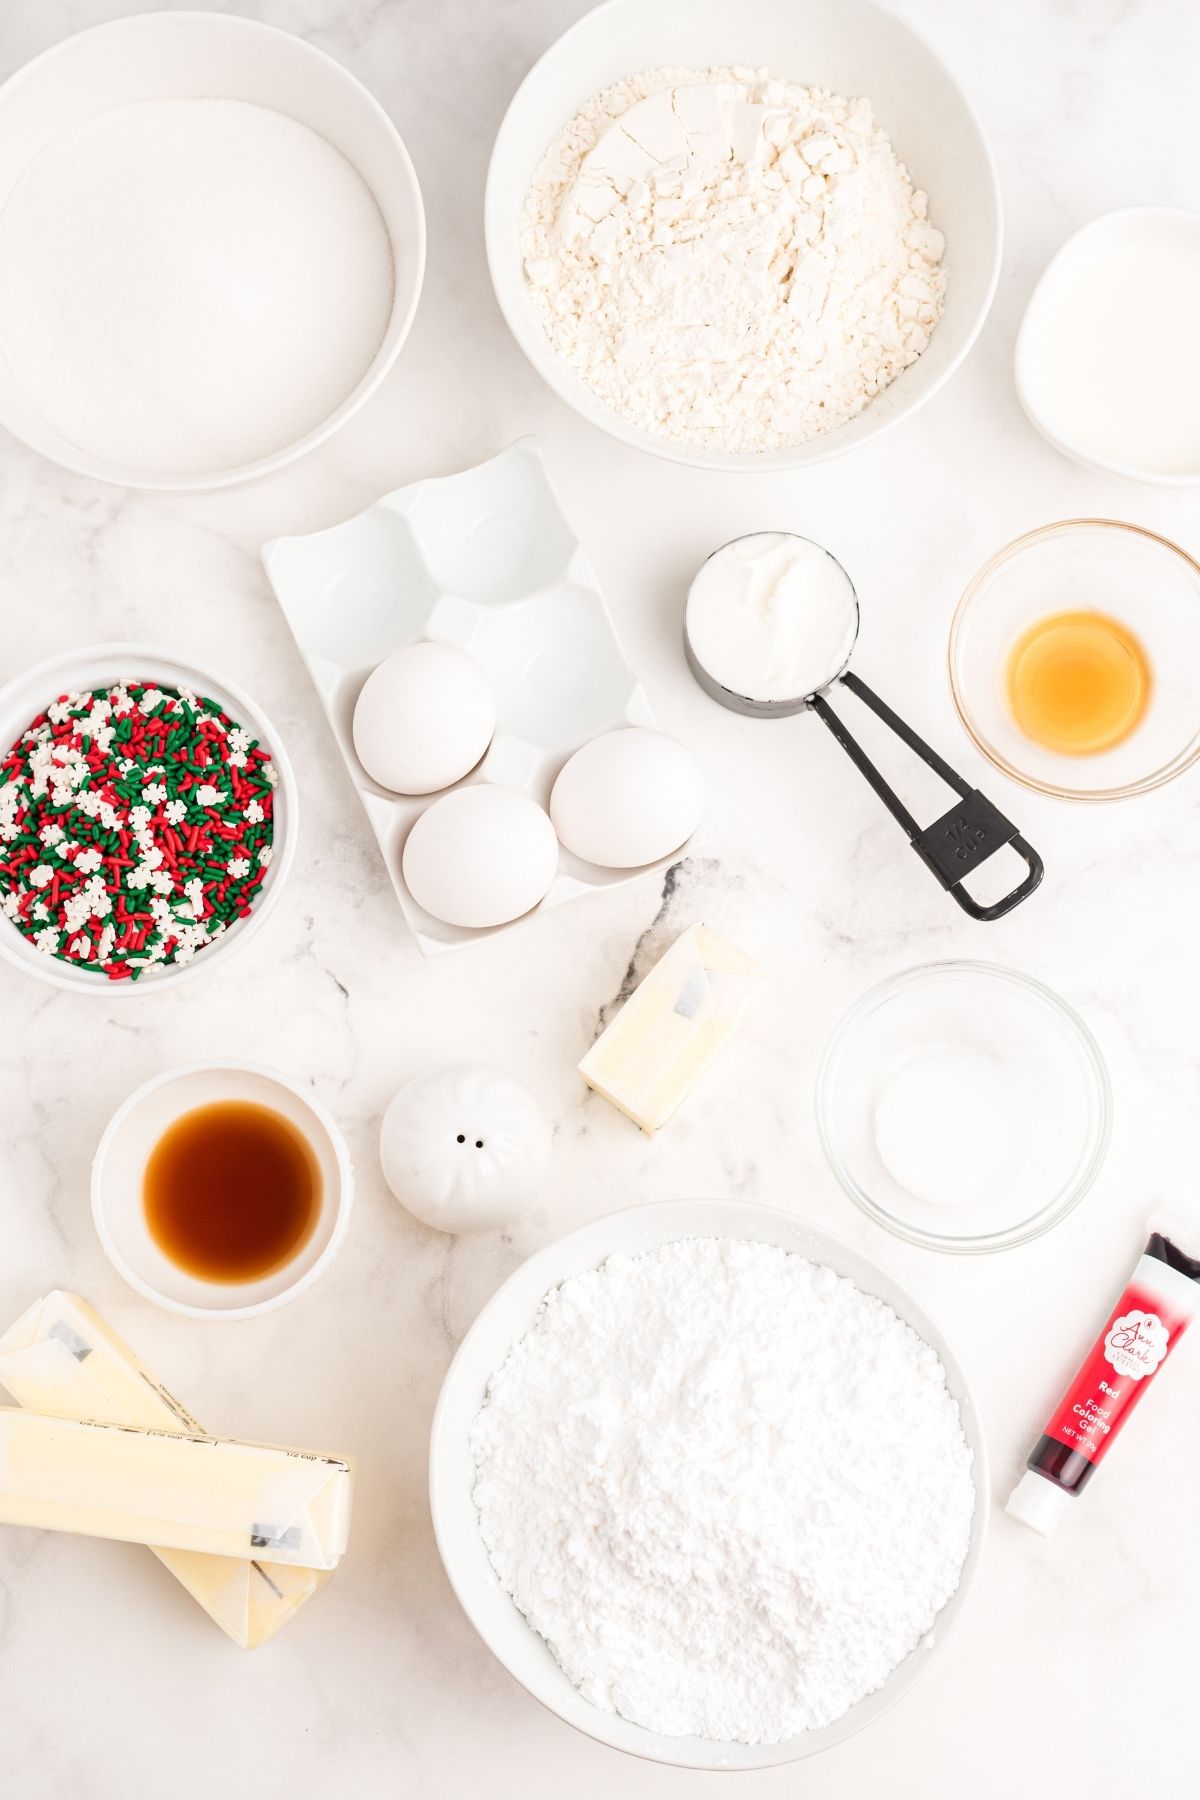 ingredients on white counter: butter, sugar, 3 white eggs, vanilla, Christmas sprinkles, powdered sugar, food coloring, milk